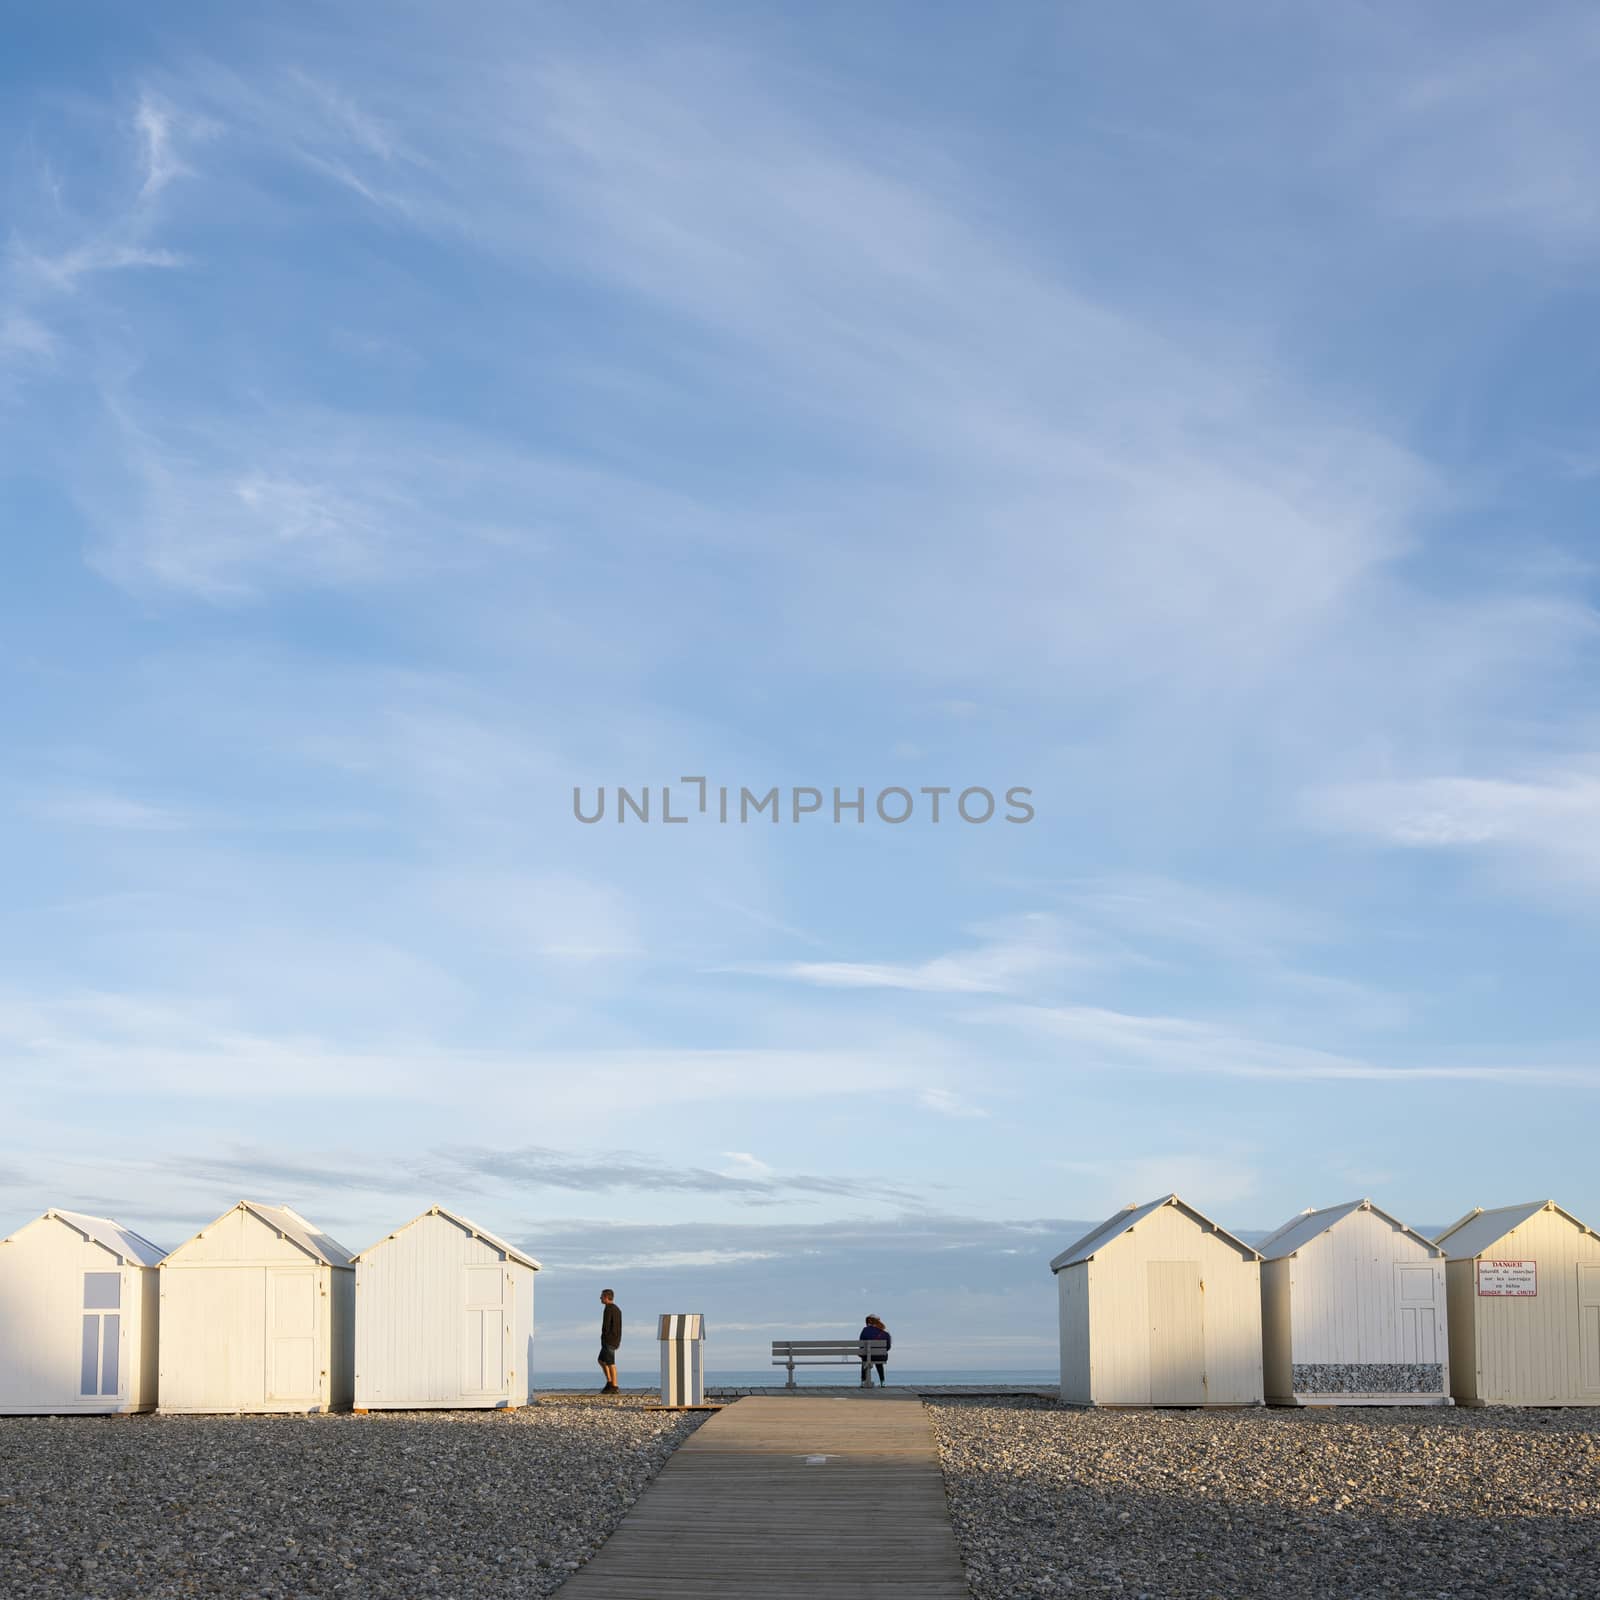 cayeux, france, 6 august 2020: people near beach huts in cayeux s mer in french normandy under blue sky in early morning sunlight